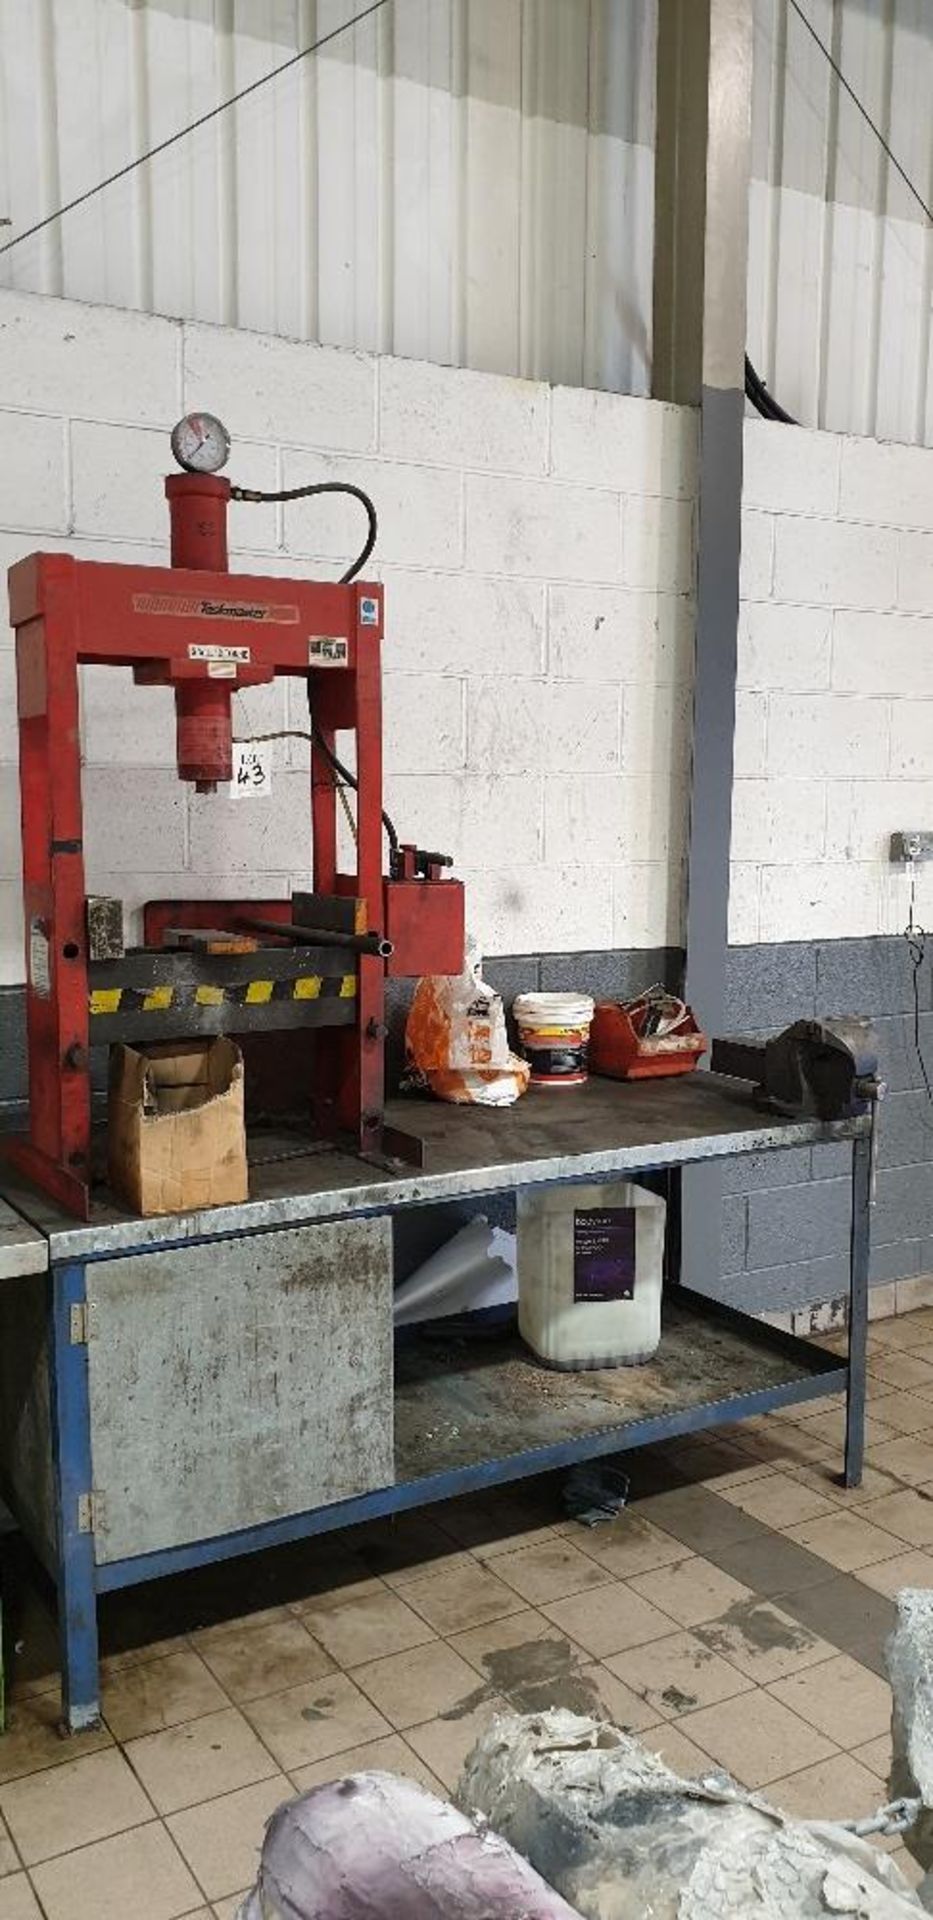 Bench with Irwin No.6 bench vice and Taskmaster 12 tonne hydraulic press